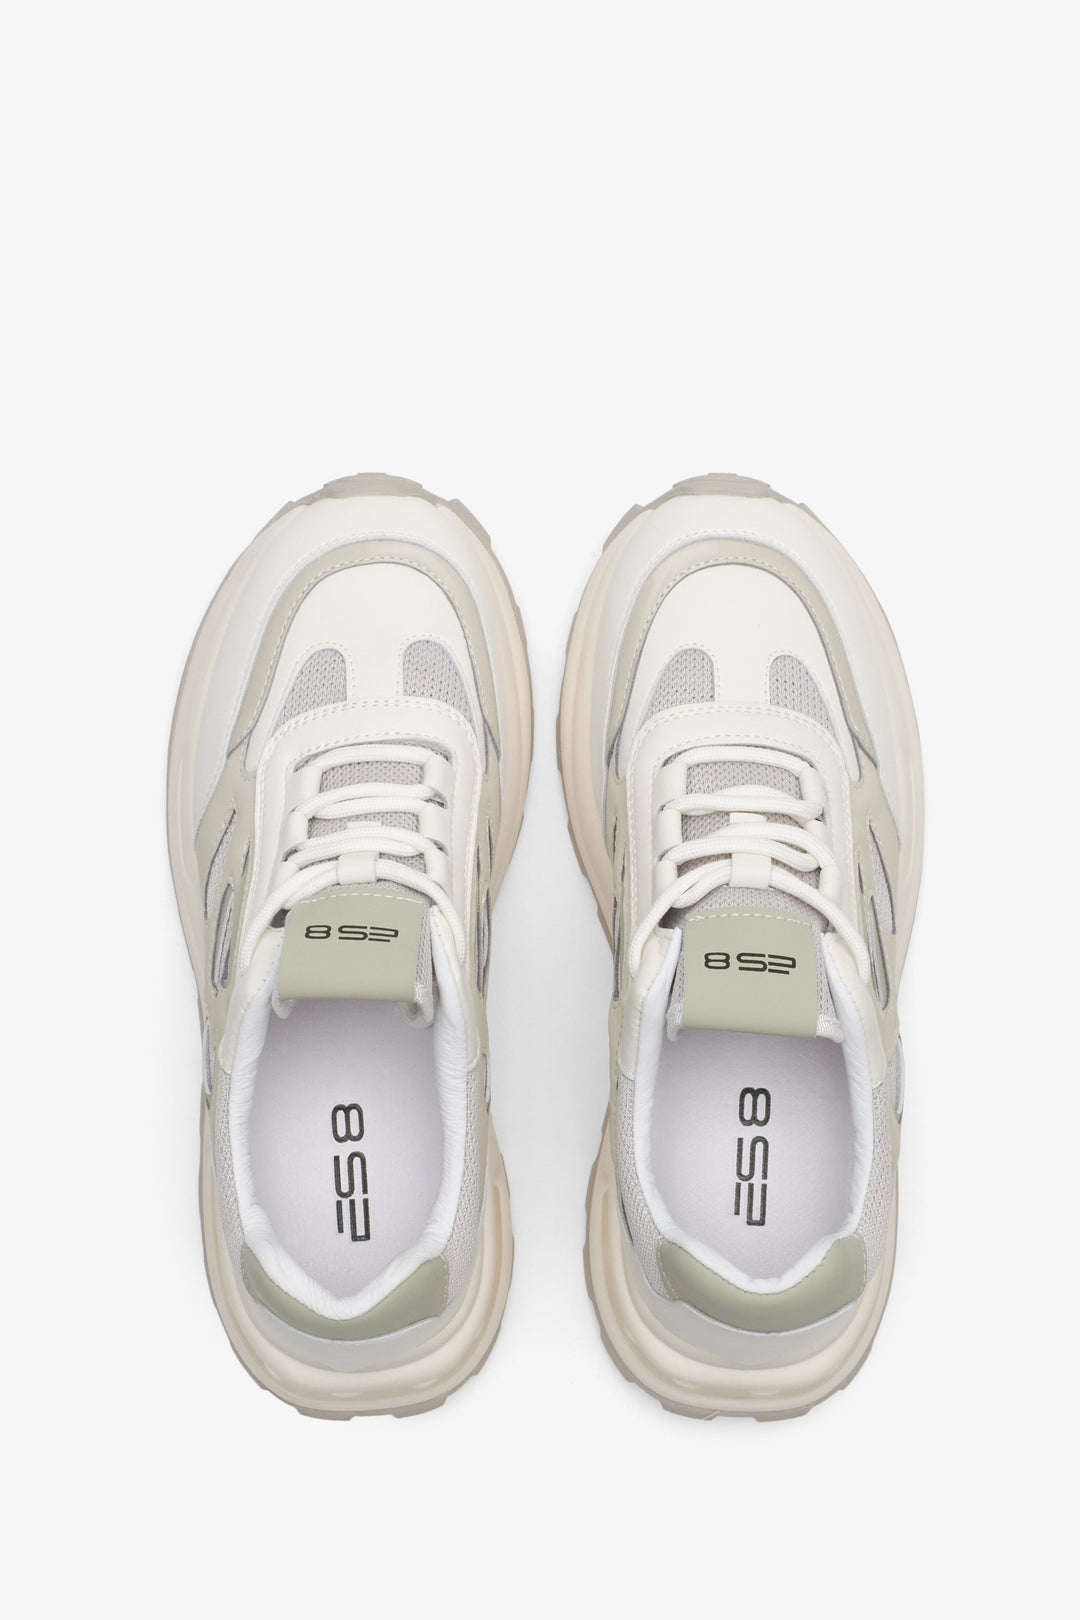 ES8 women's sneakers in light beige colour made of mixed materials - top view presentation of the model.